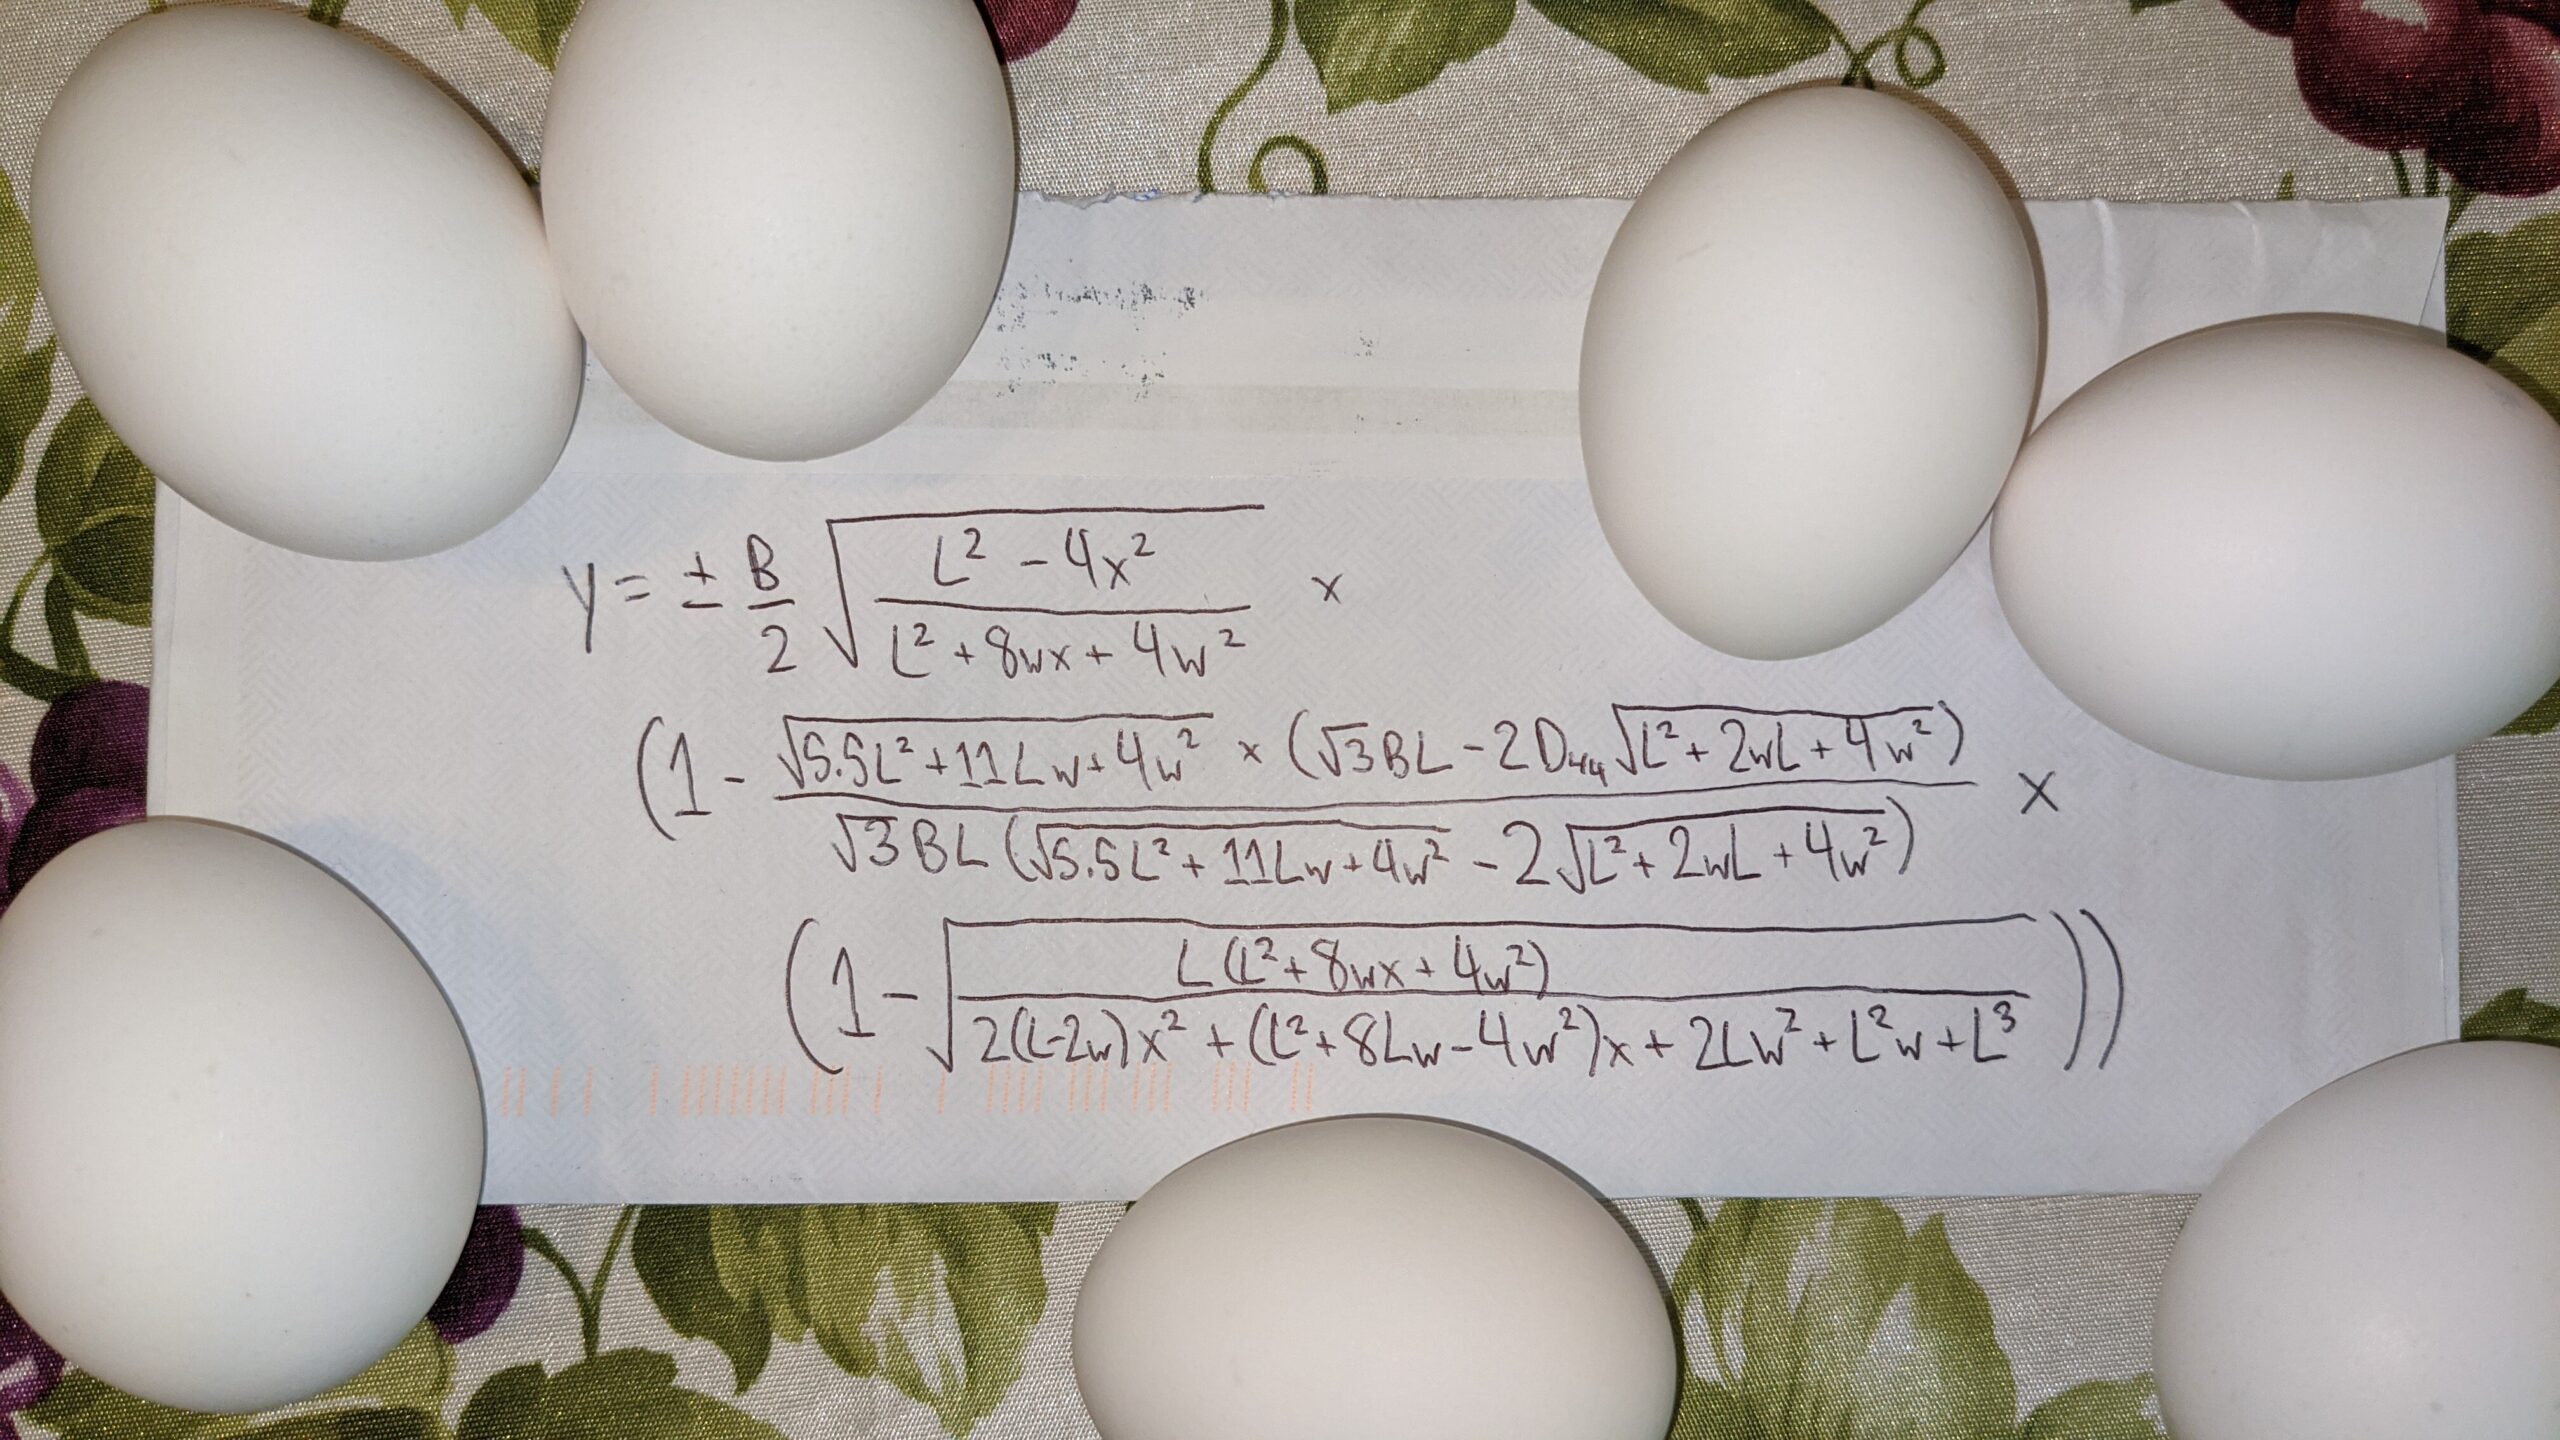 A long, handwritten equation surrounded by white chicken eggs